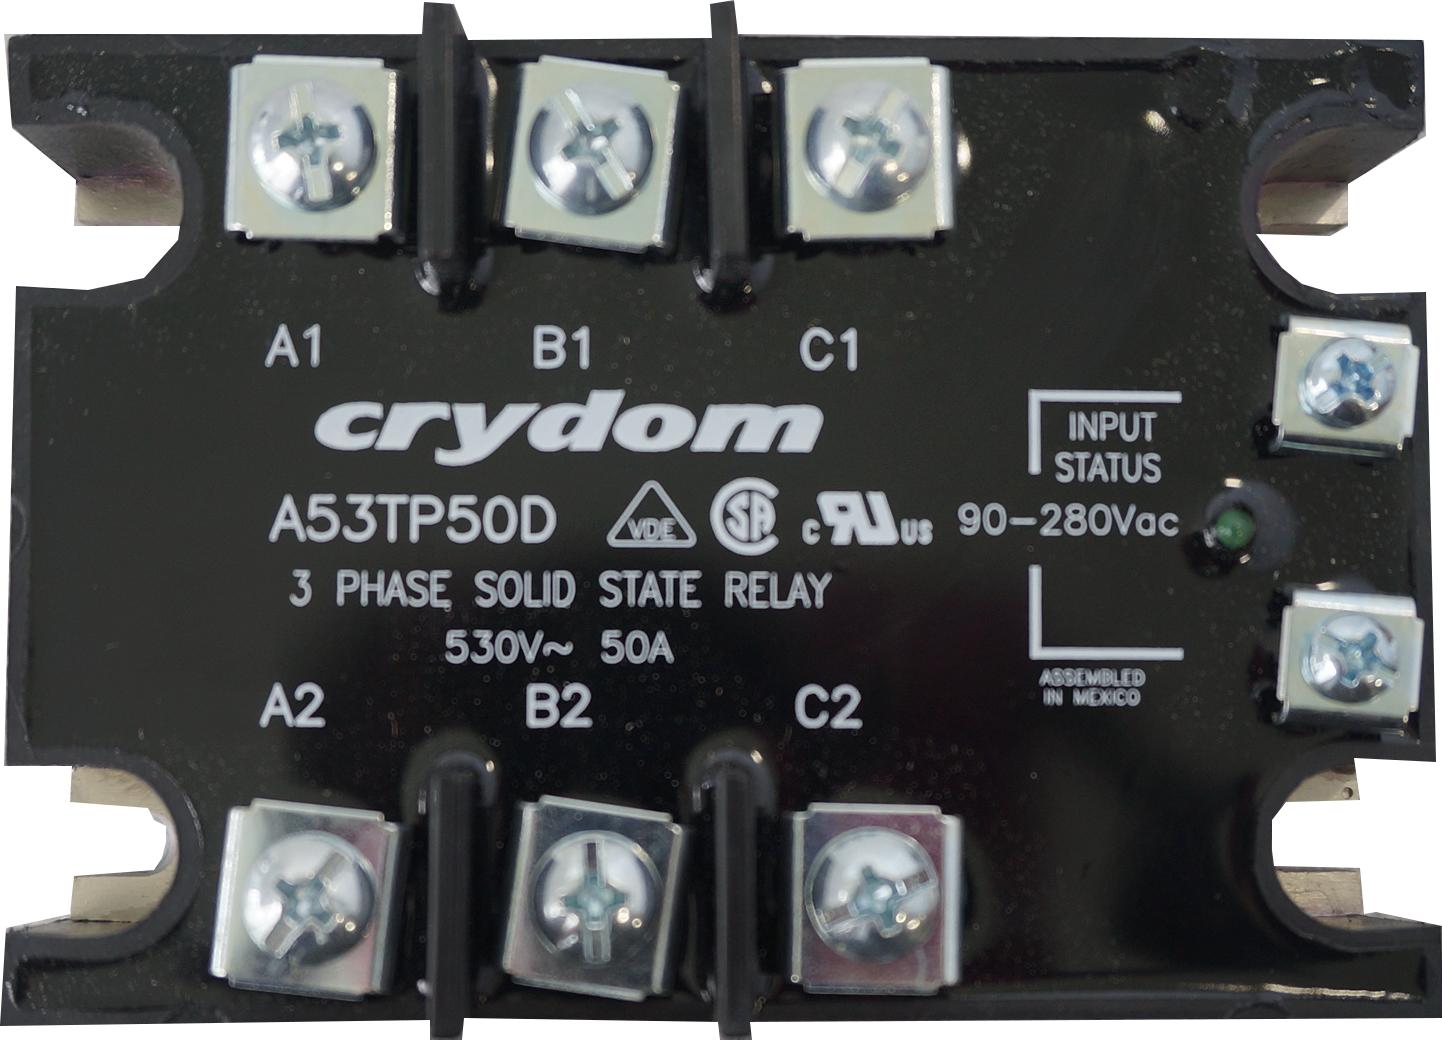 A53TP50D + KS300, Solid State Relay, 3 Phase 90-280VAC Control, 50A, 48-530VAC Load, LED Status Indicator + Cover